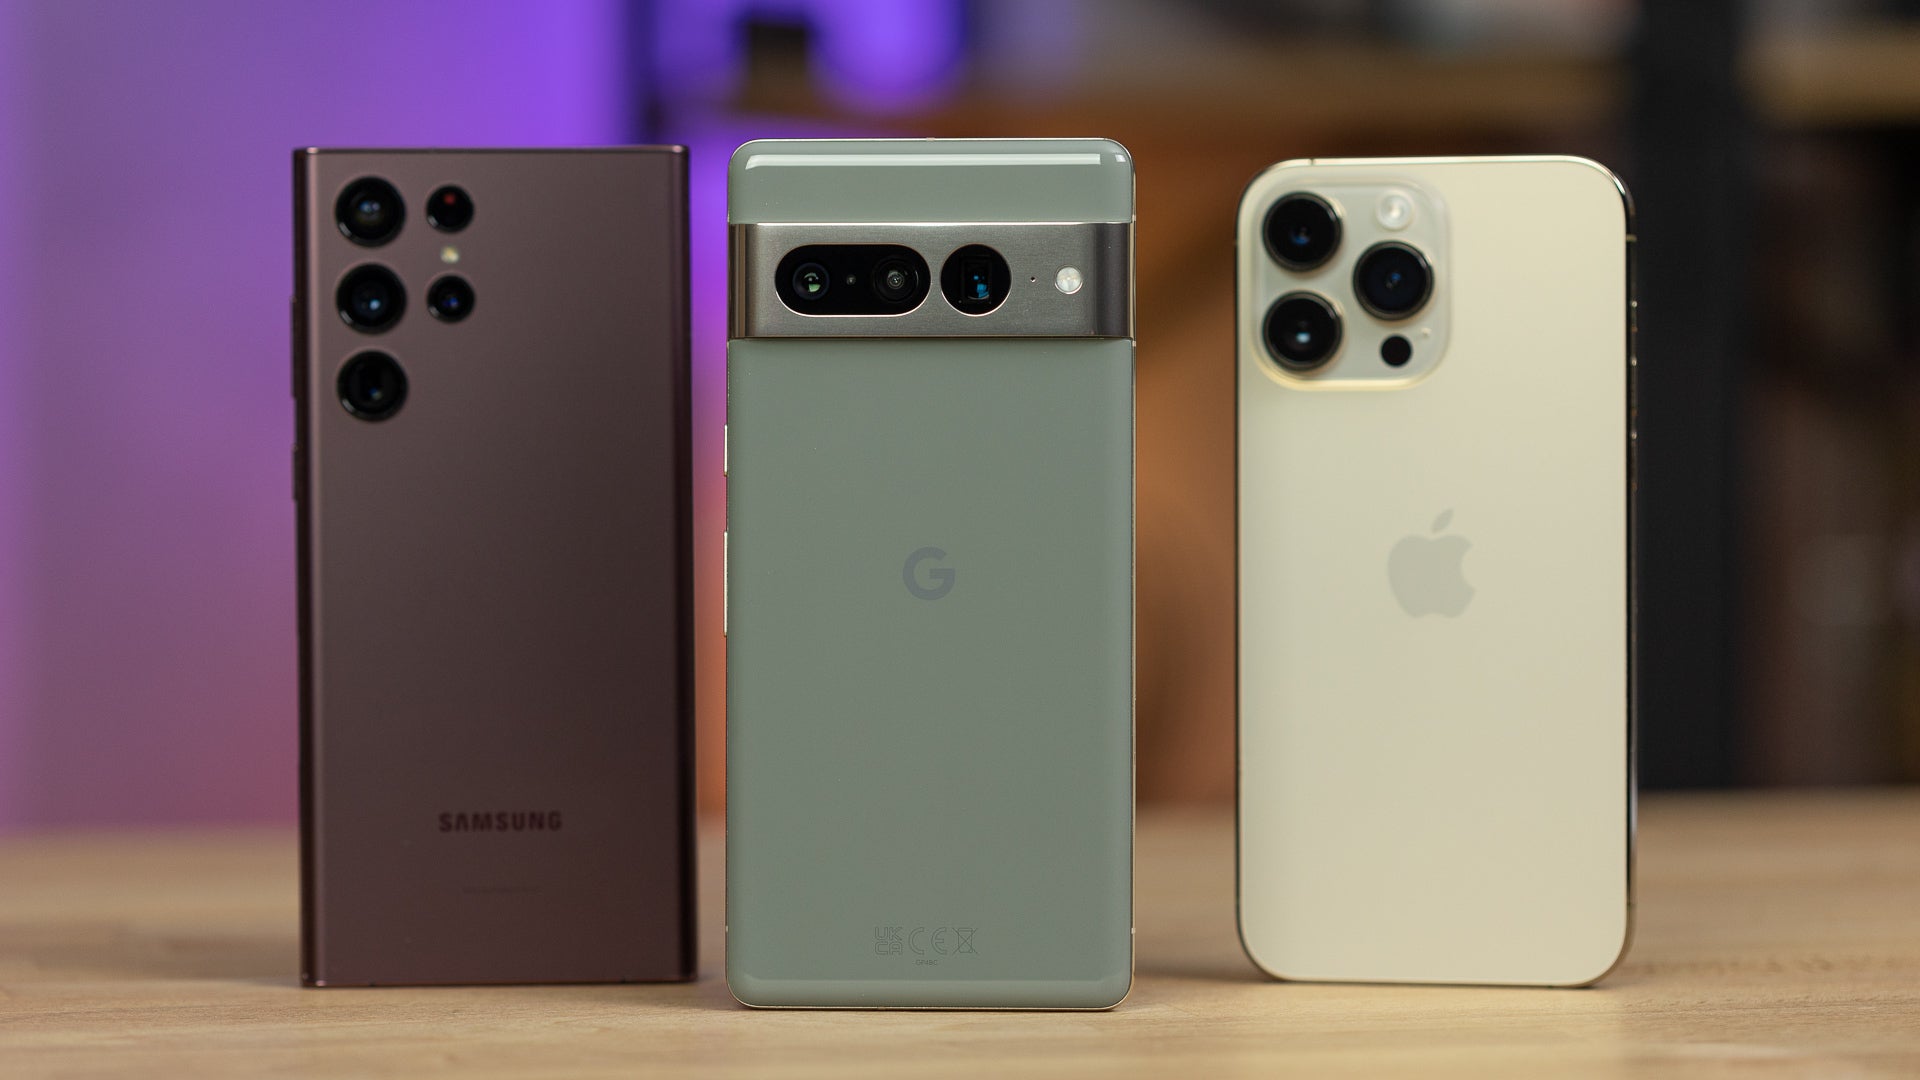 (Image Credit - PhoneArena) Pixel 7 Pro in the middle - Pixel 7 Pro vs iPhone 14 Pro vs Galaxy S22 Ultra: Camera Comparison